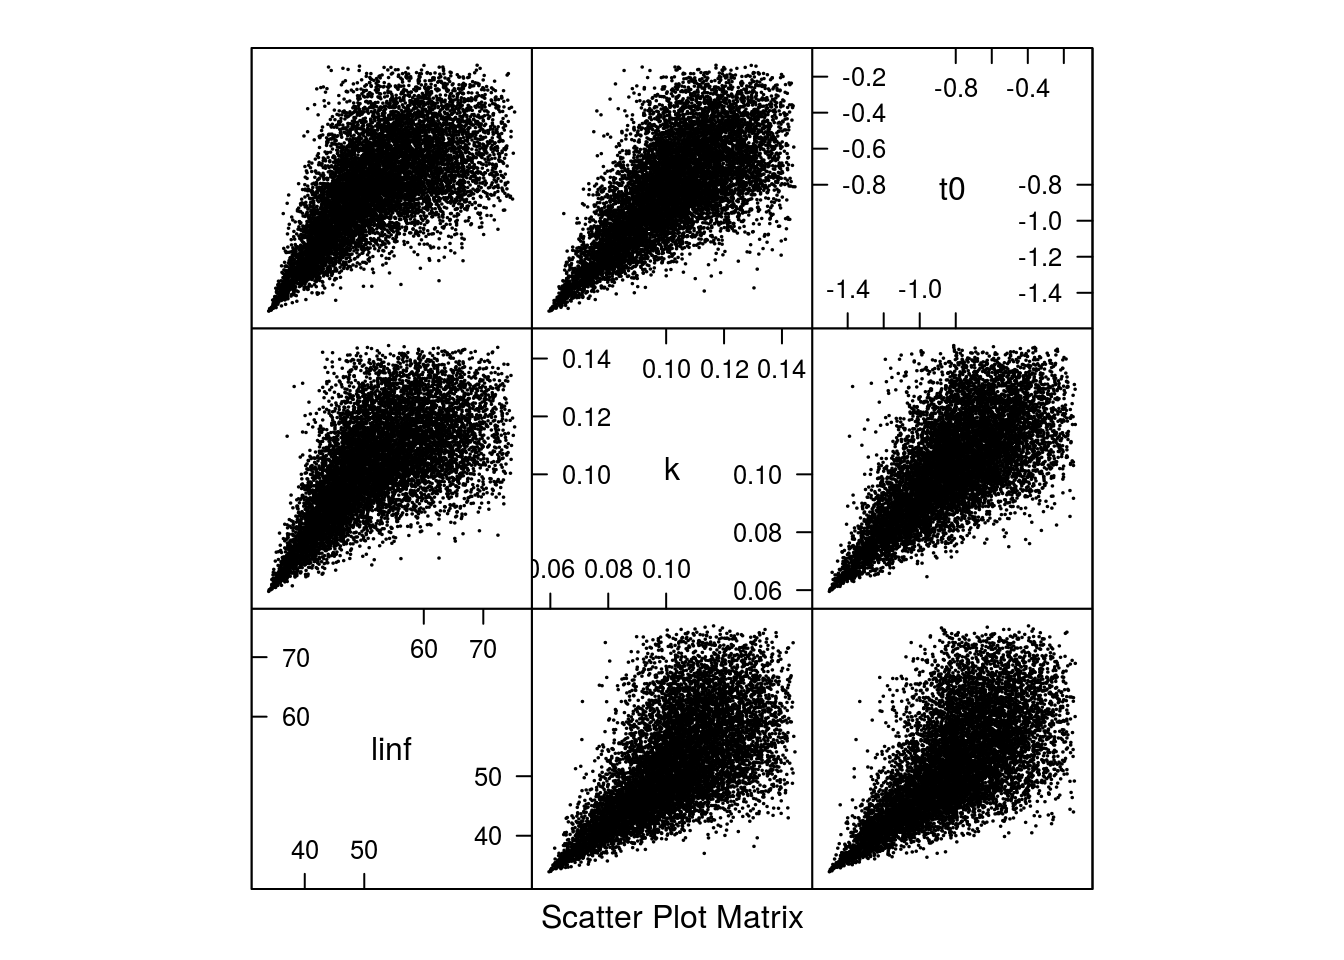 Scatter plot of the 10000 parameter sets based on the archmCopula copula with triangle margins.